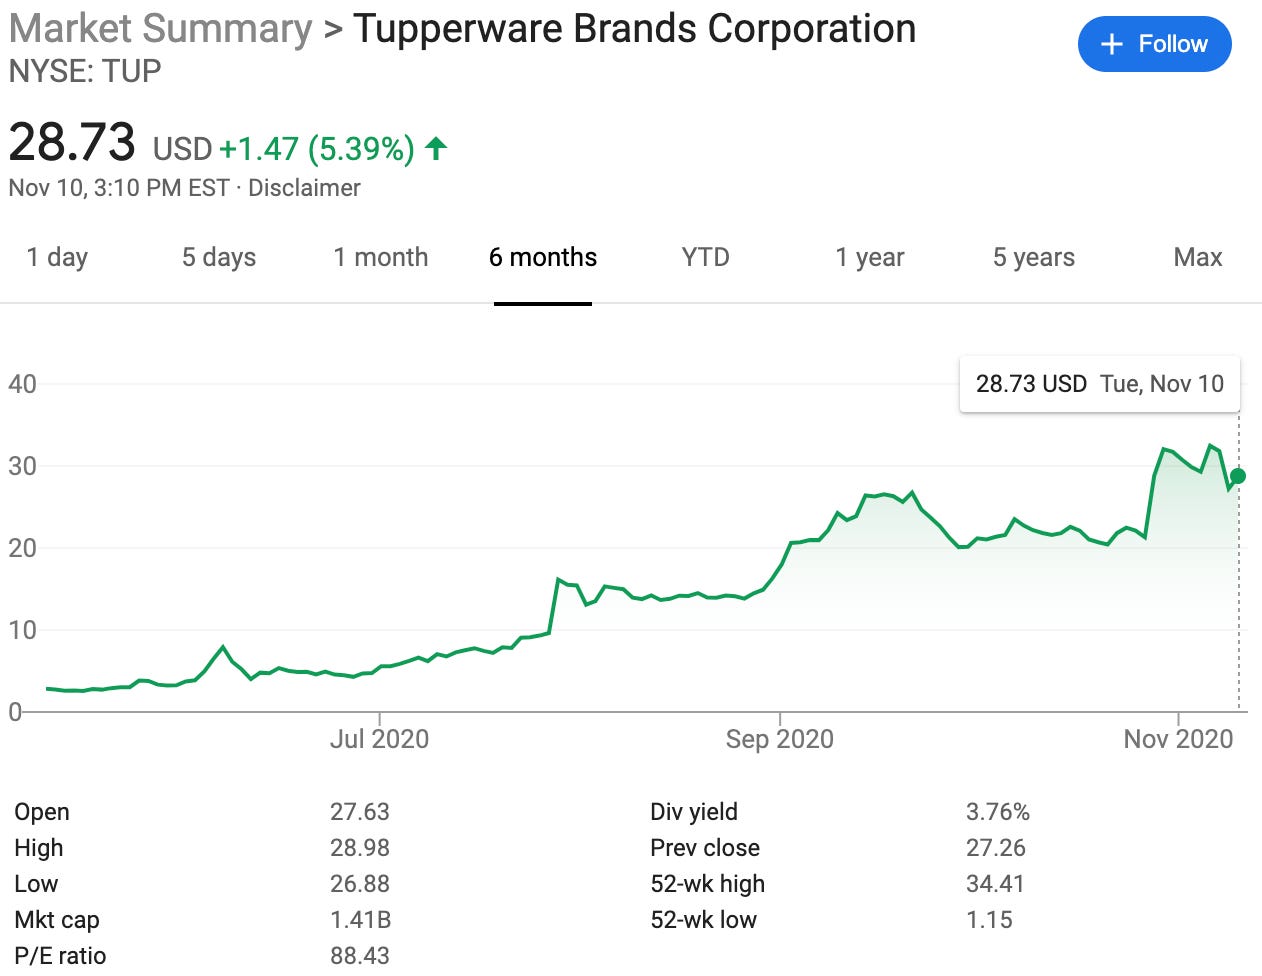 Tupperware announces new organisation structure for future growth